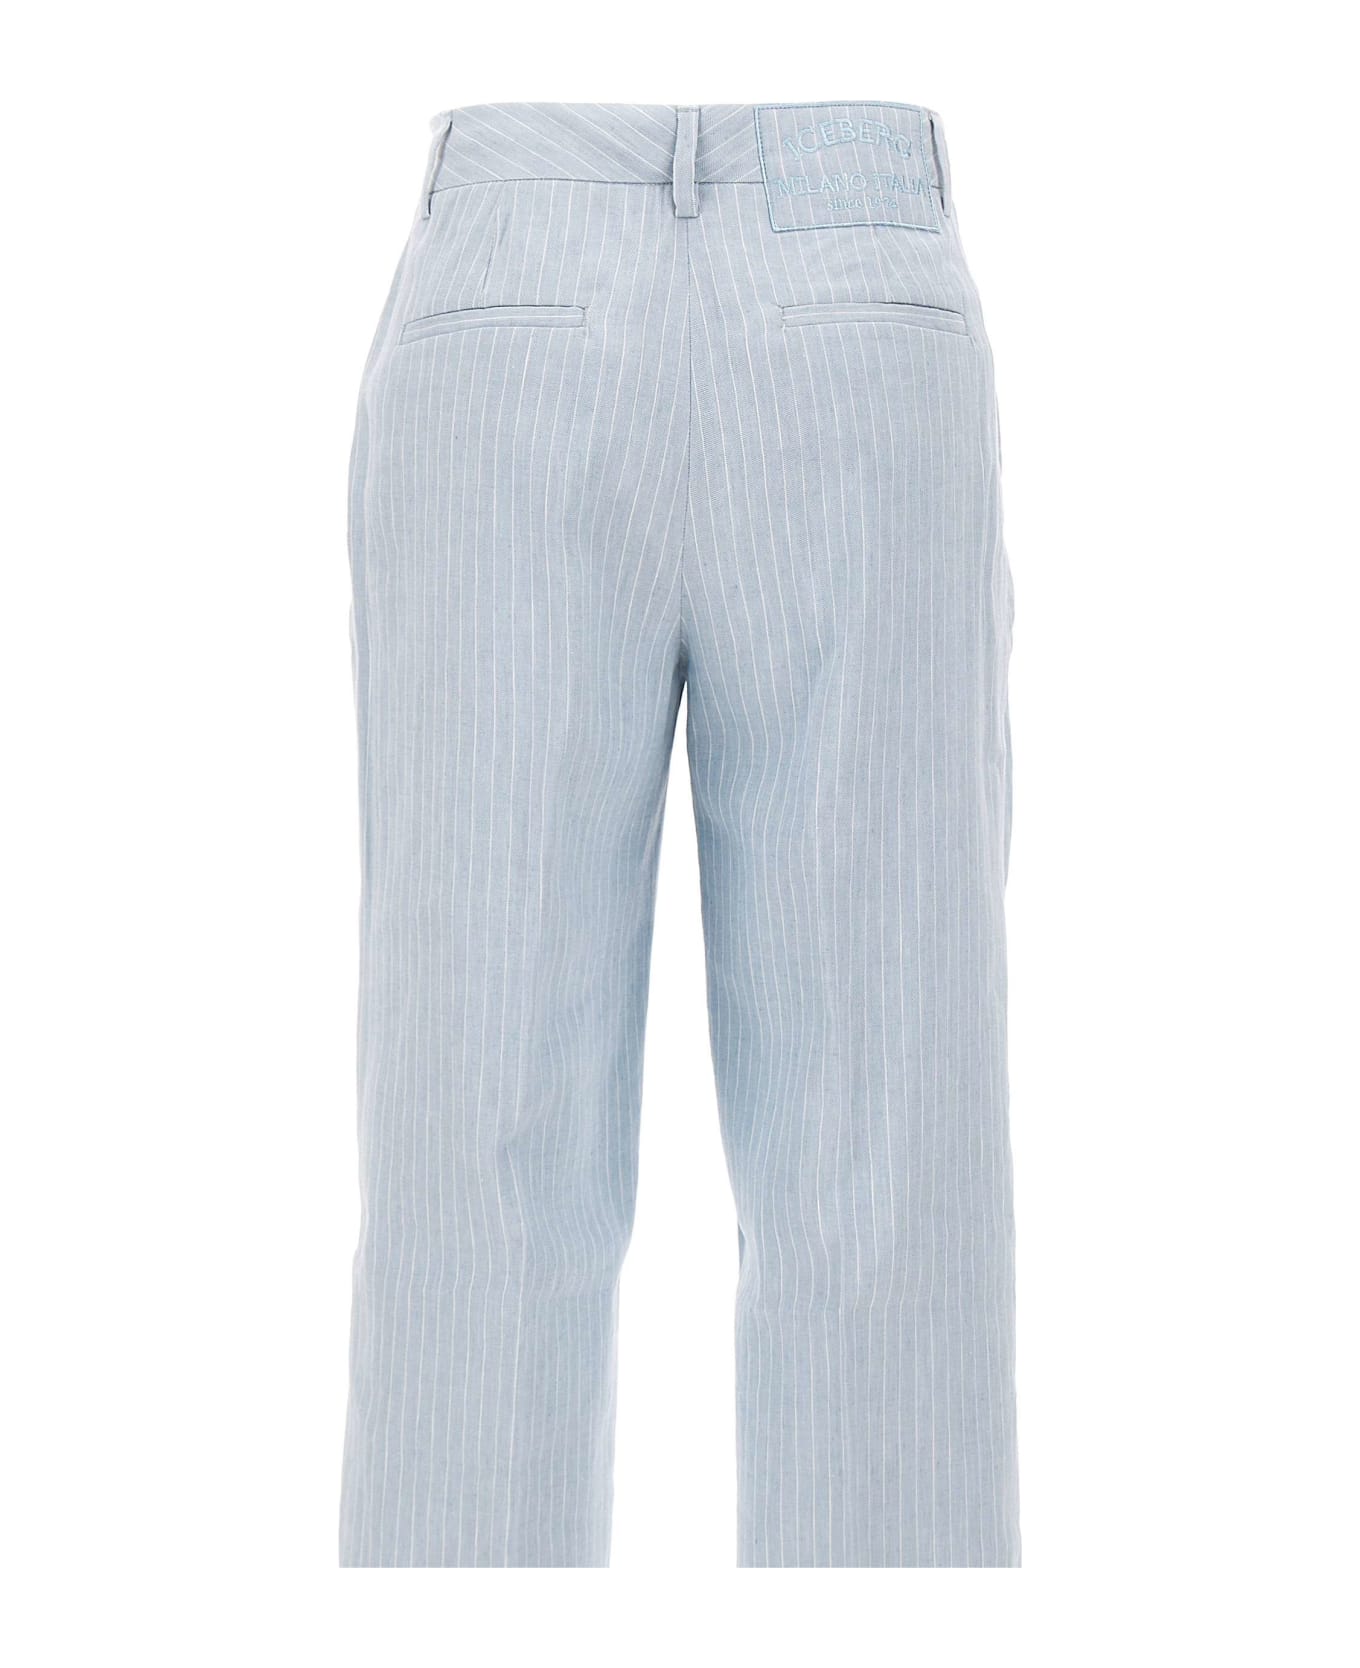 Iceberg Linen And Cotton Trousers - LIGHT BLUE ボトムス